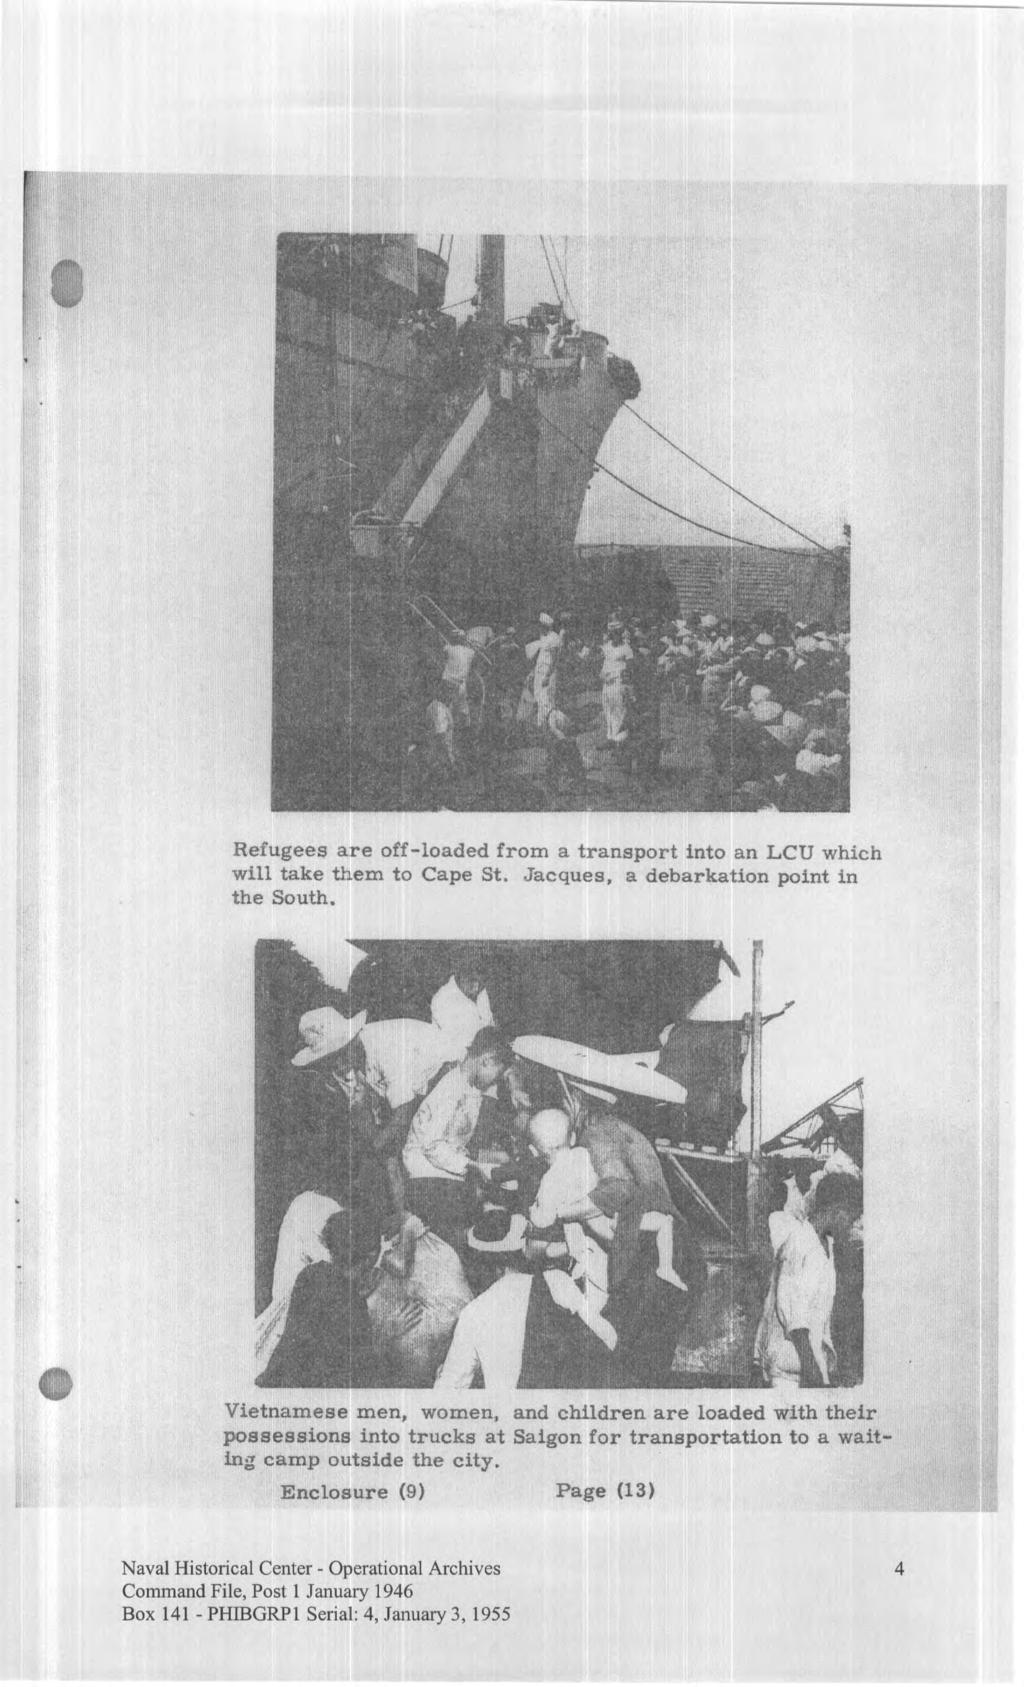 Refugees are off-loaded from a transport into an LCU which will take them to Cape St. Jacques, a debarkation point in the South.